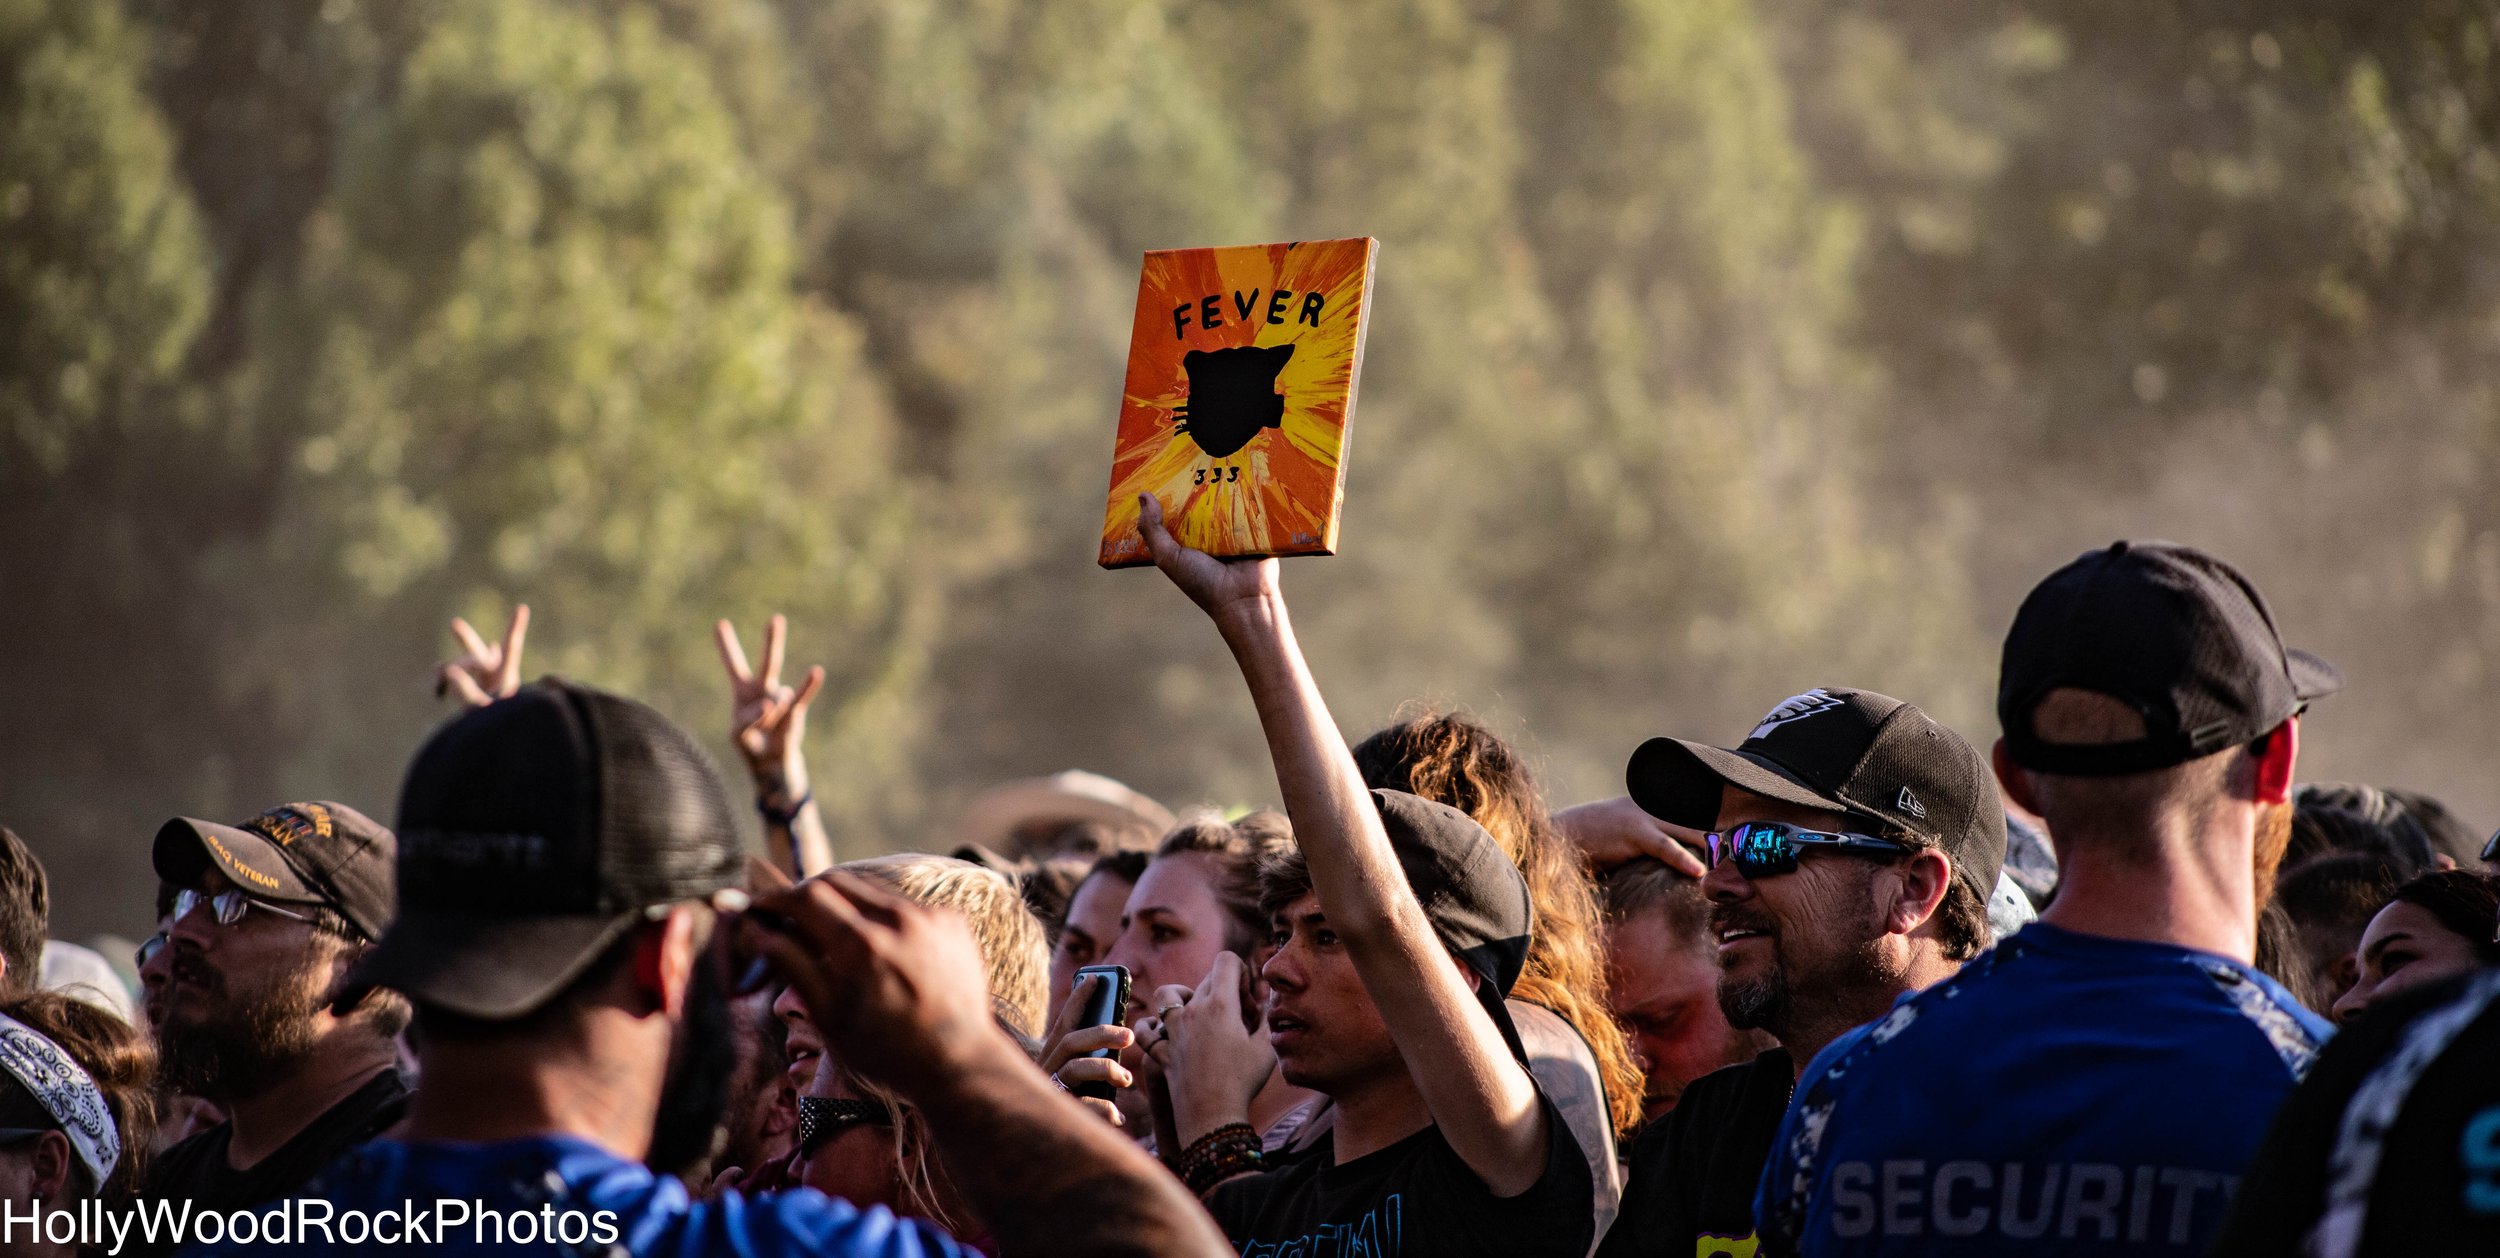 A Fever 333 Fan With Their Original Artwork at Blue Ridge Rock Festival by Holly Williams